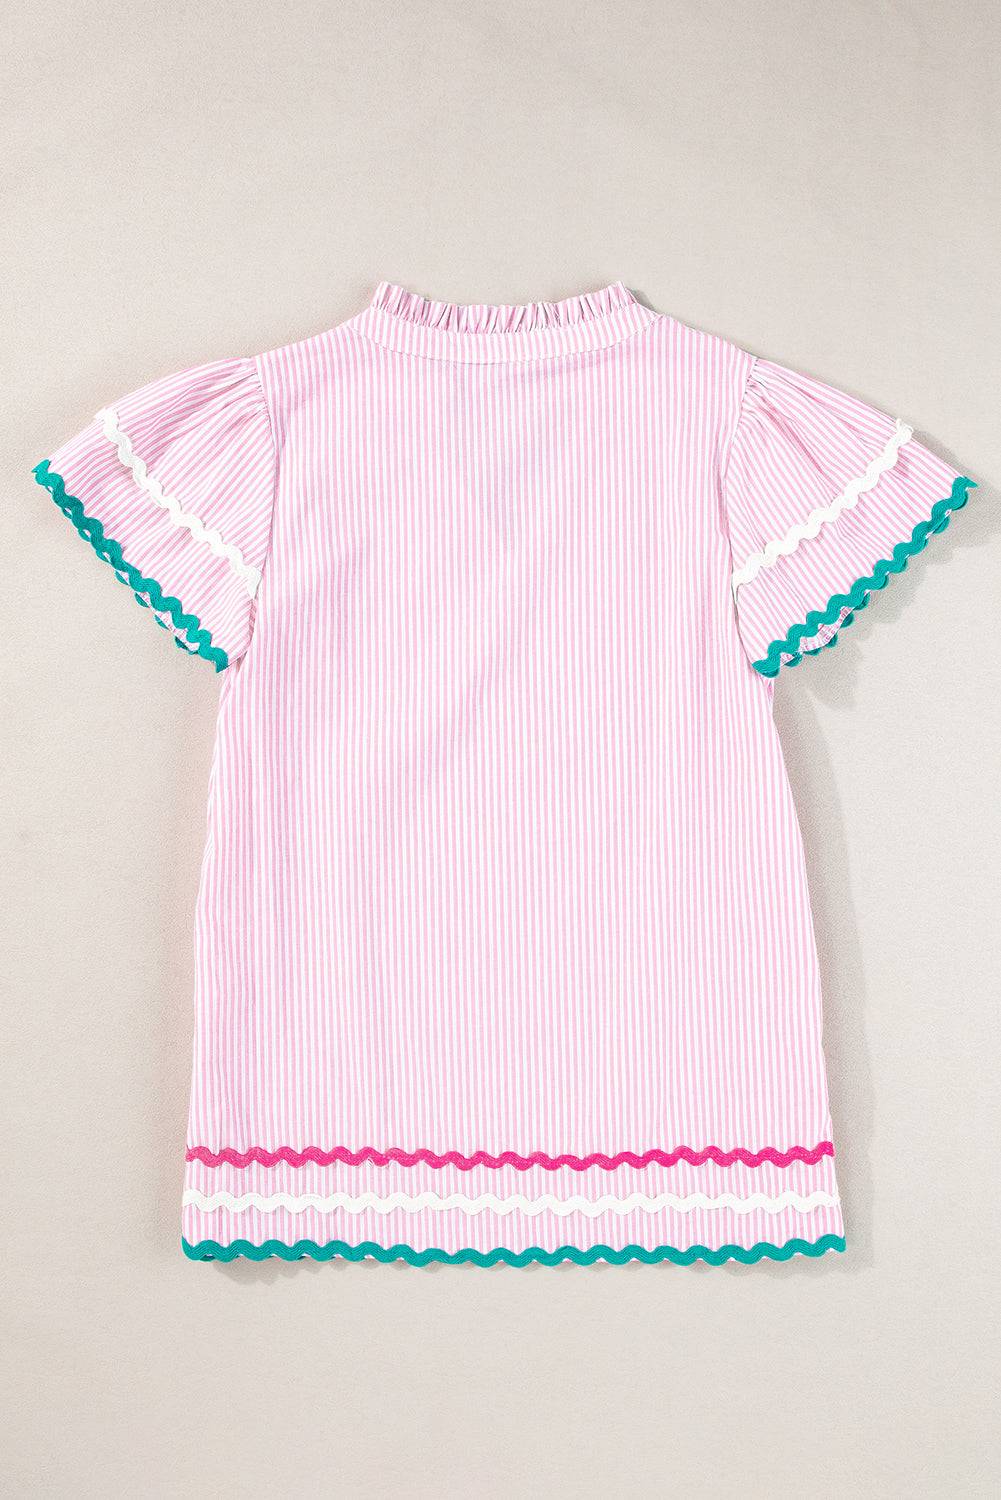 a pink and white striped dress with blue trim